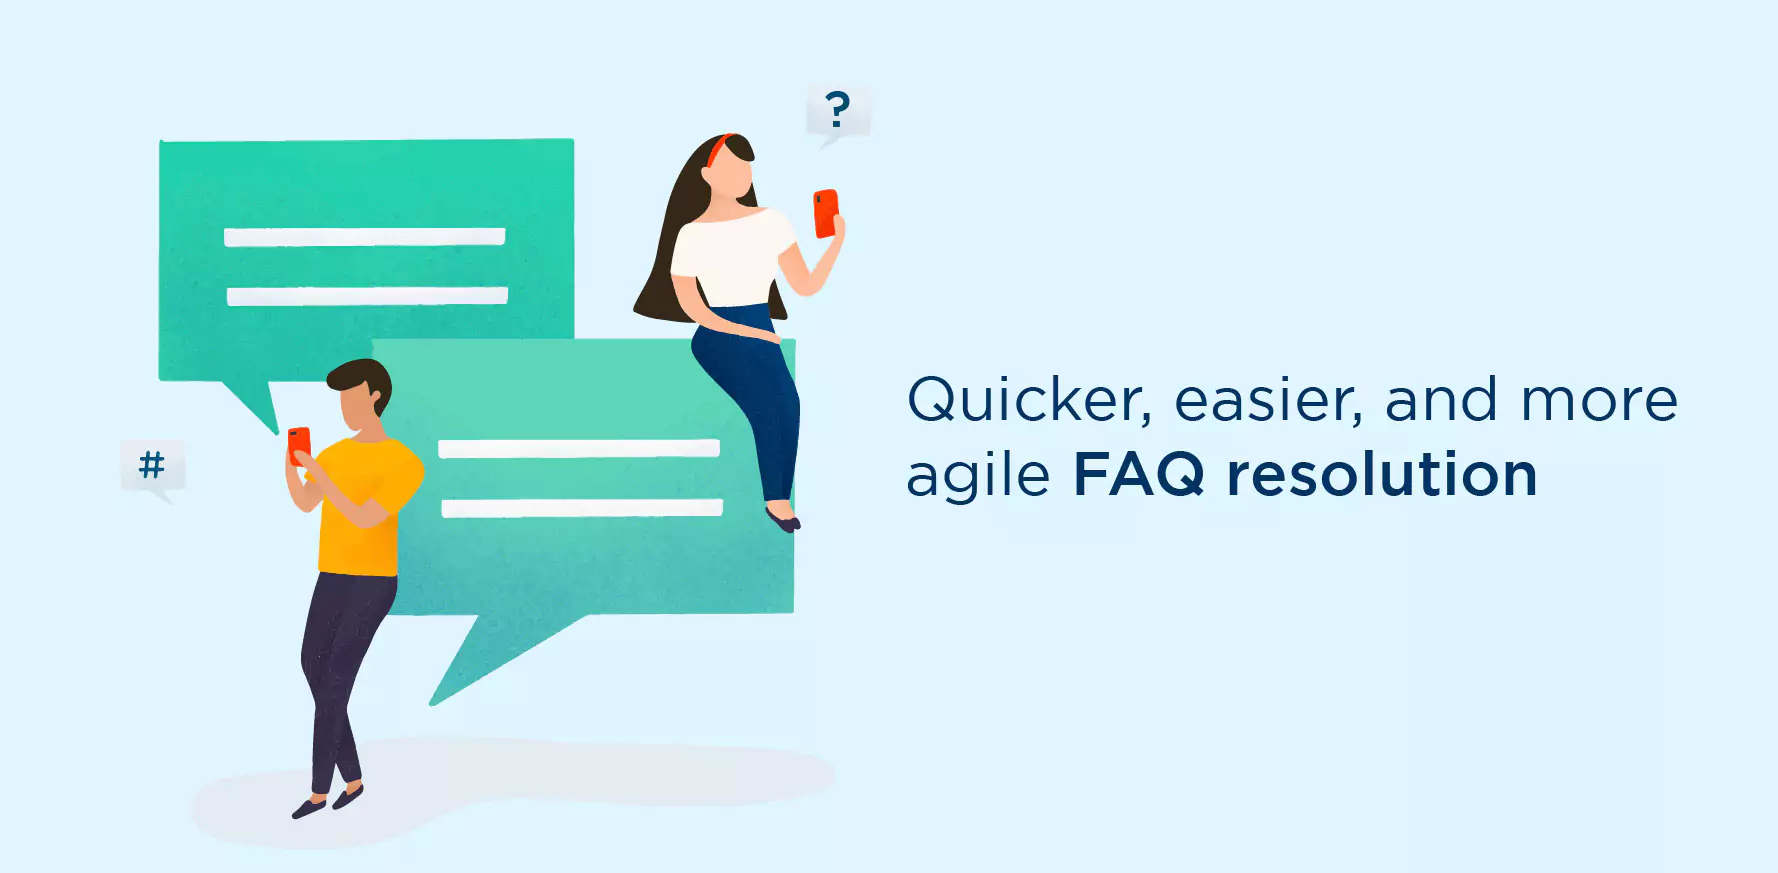 Quicker, easier, and more agile FAQ resolution